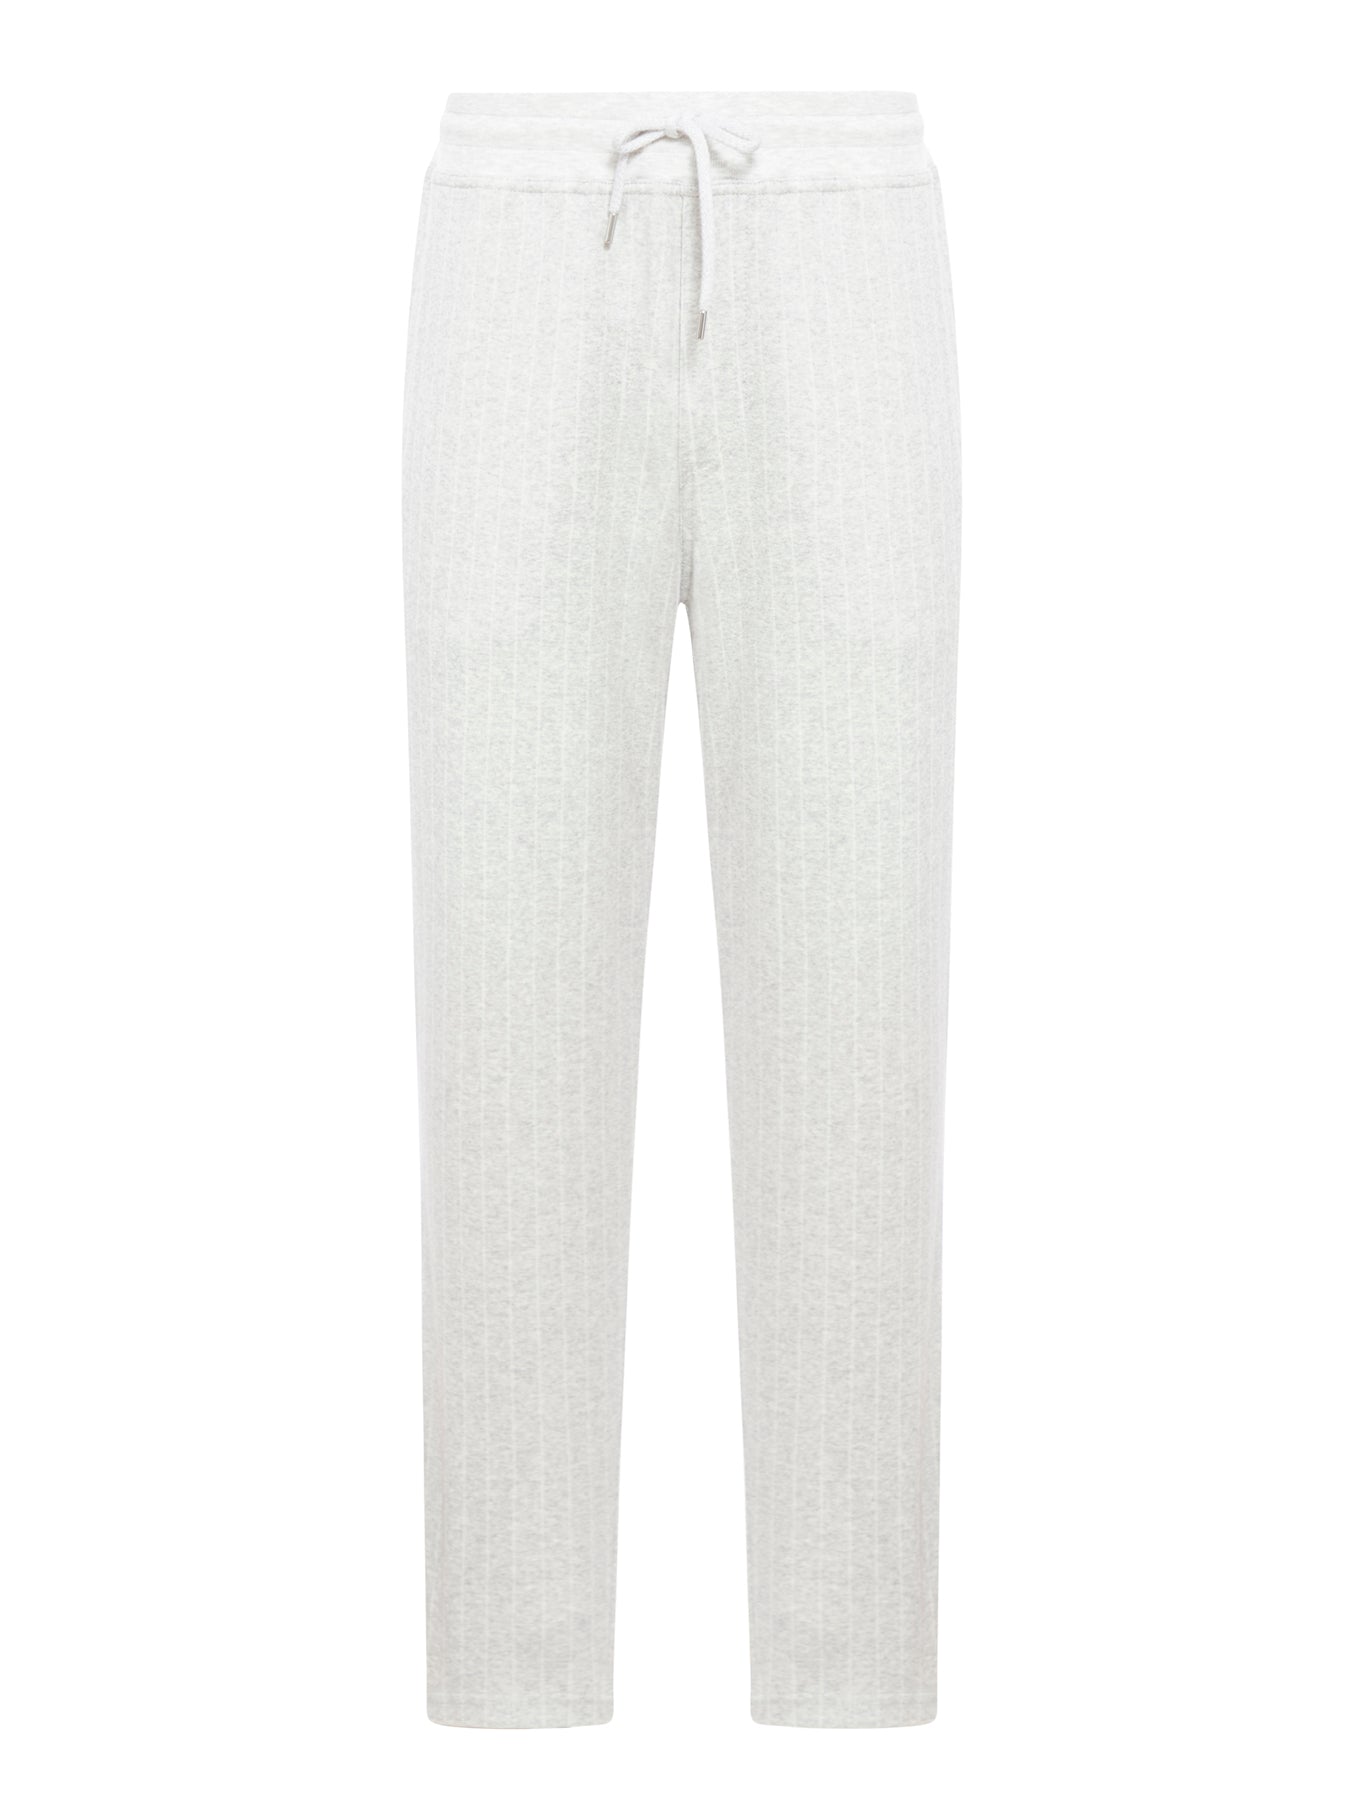 Cotton blend pinstriped trousers